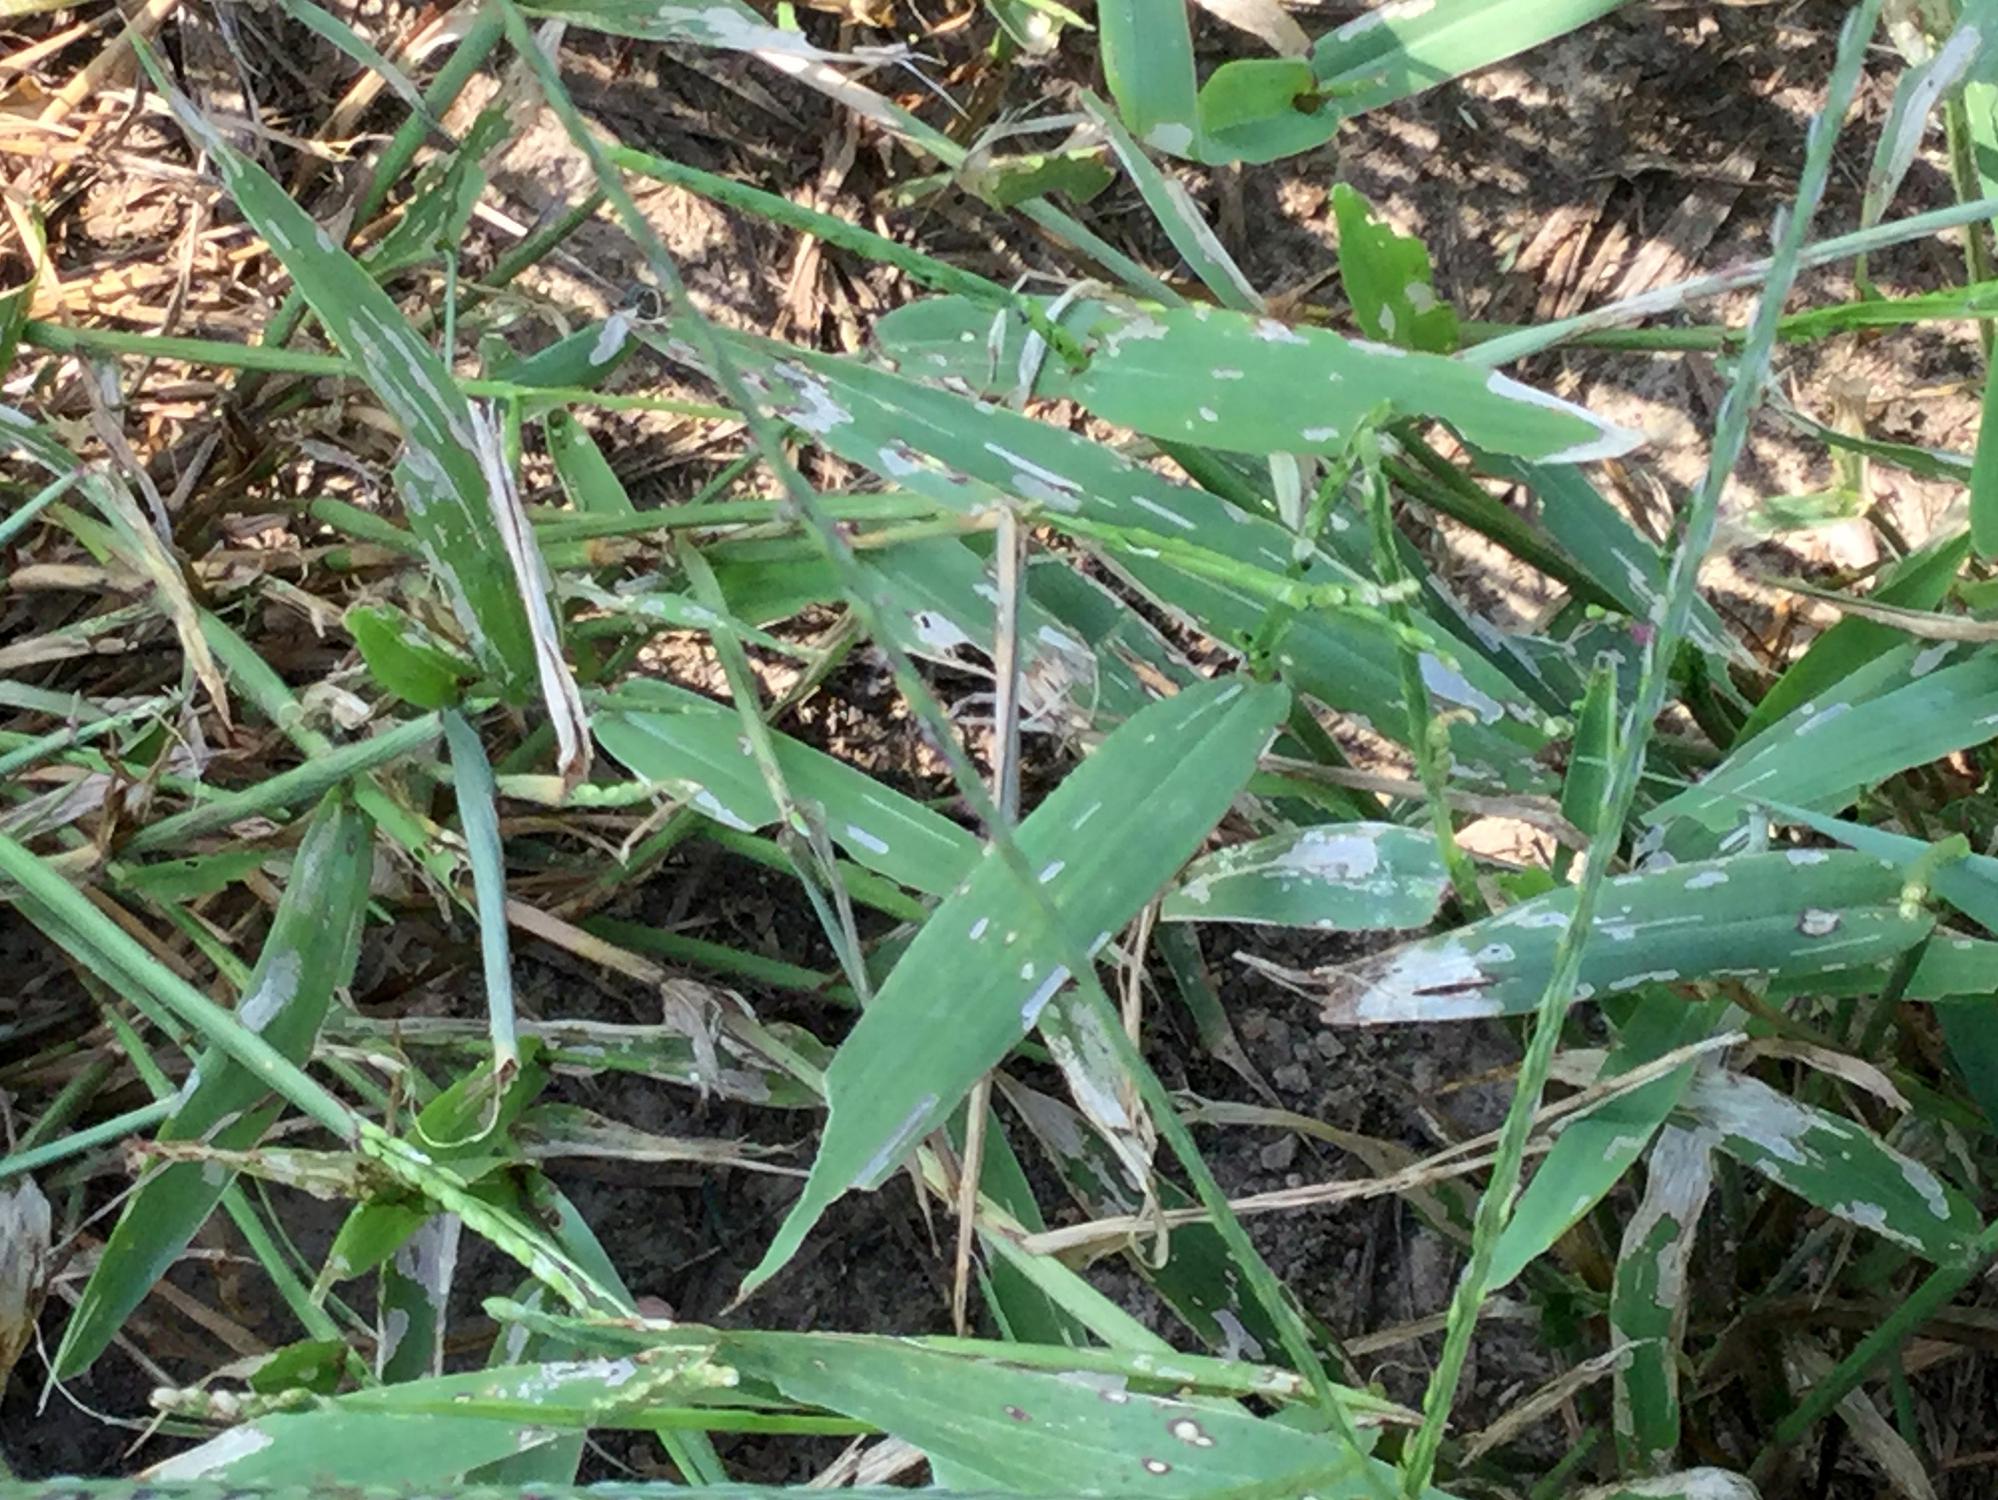 A closeup of signal grass blades shows grayish areas from armyworm damage.